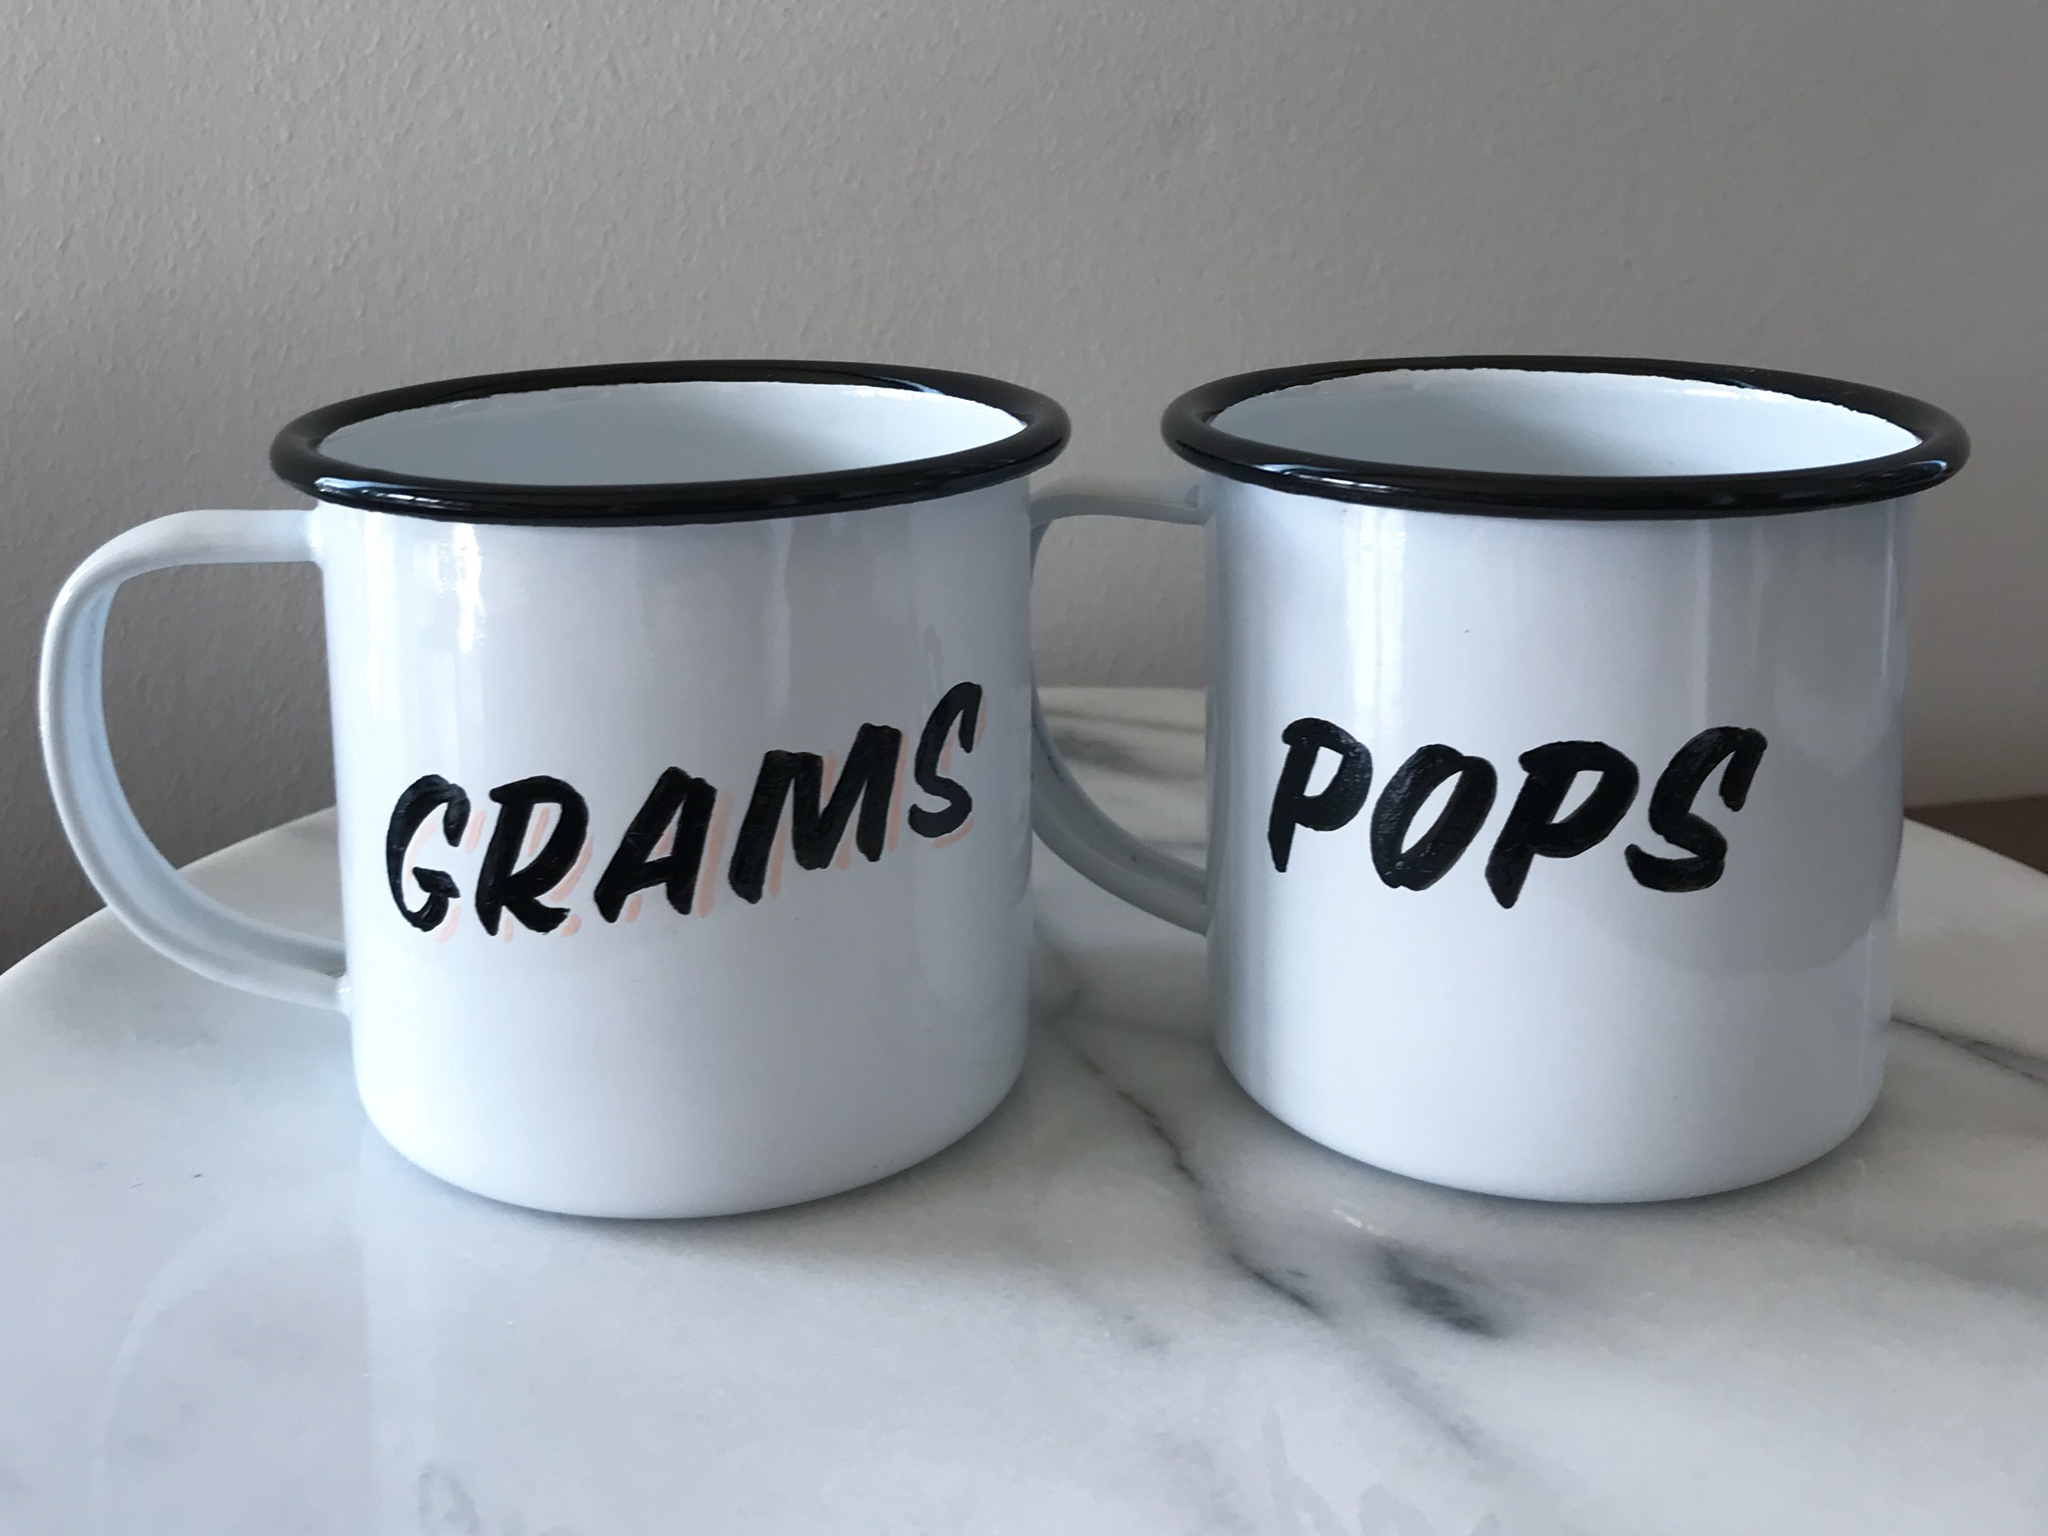 Hand painted custom Grams and Pops camping mugs painted by Hillery Powers